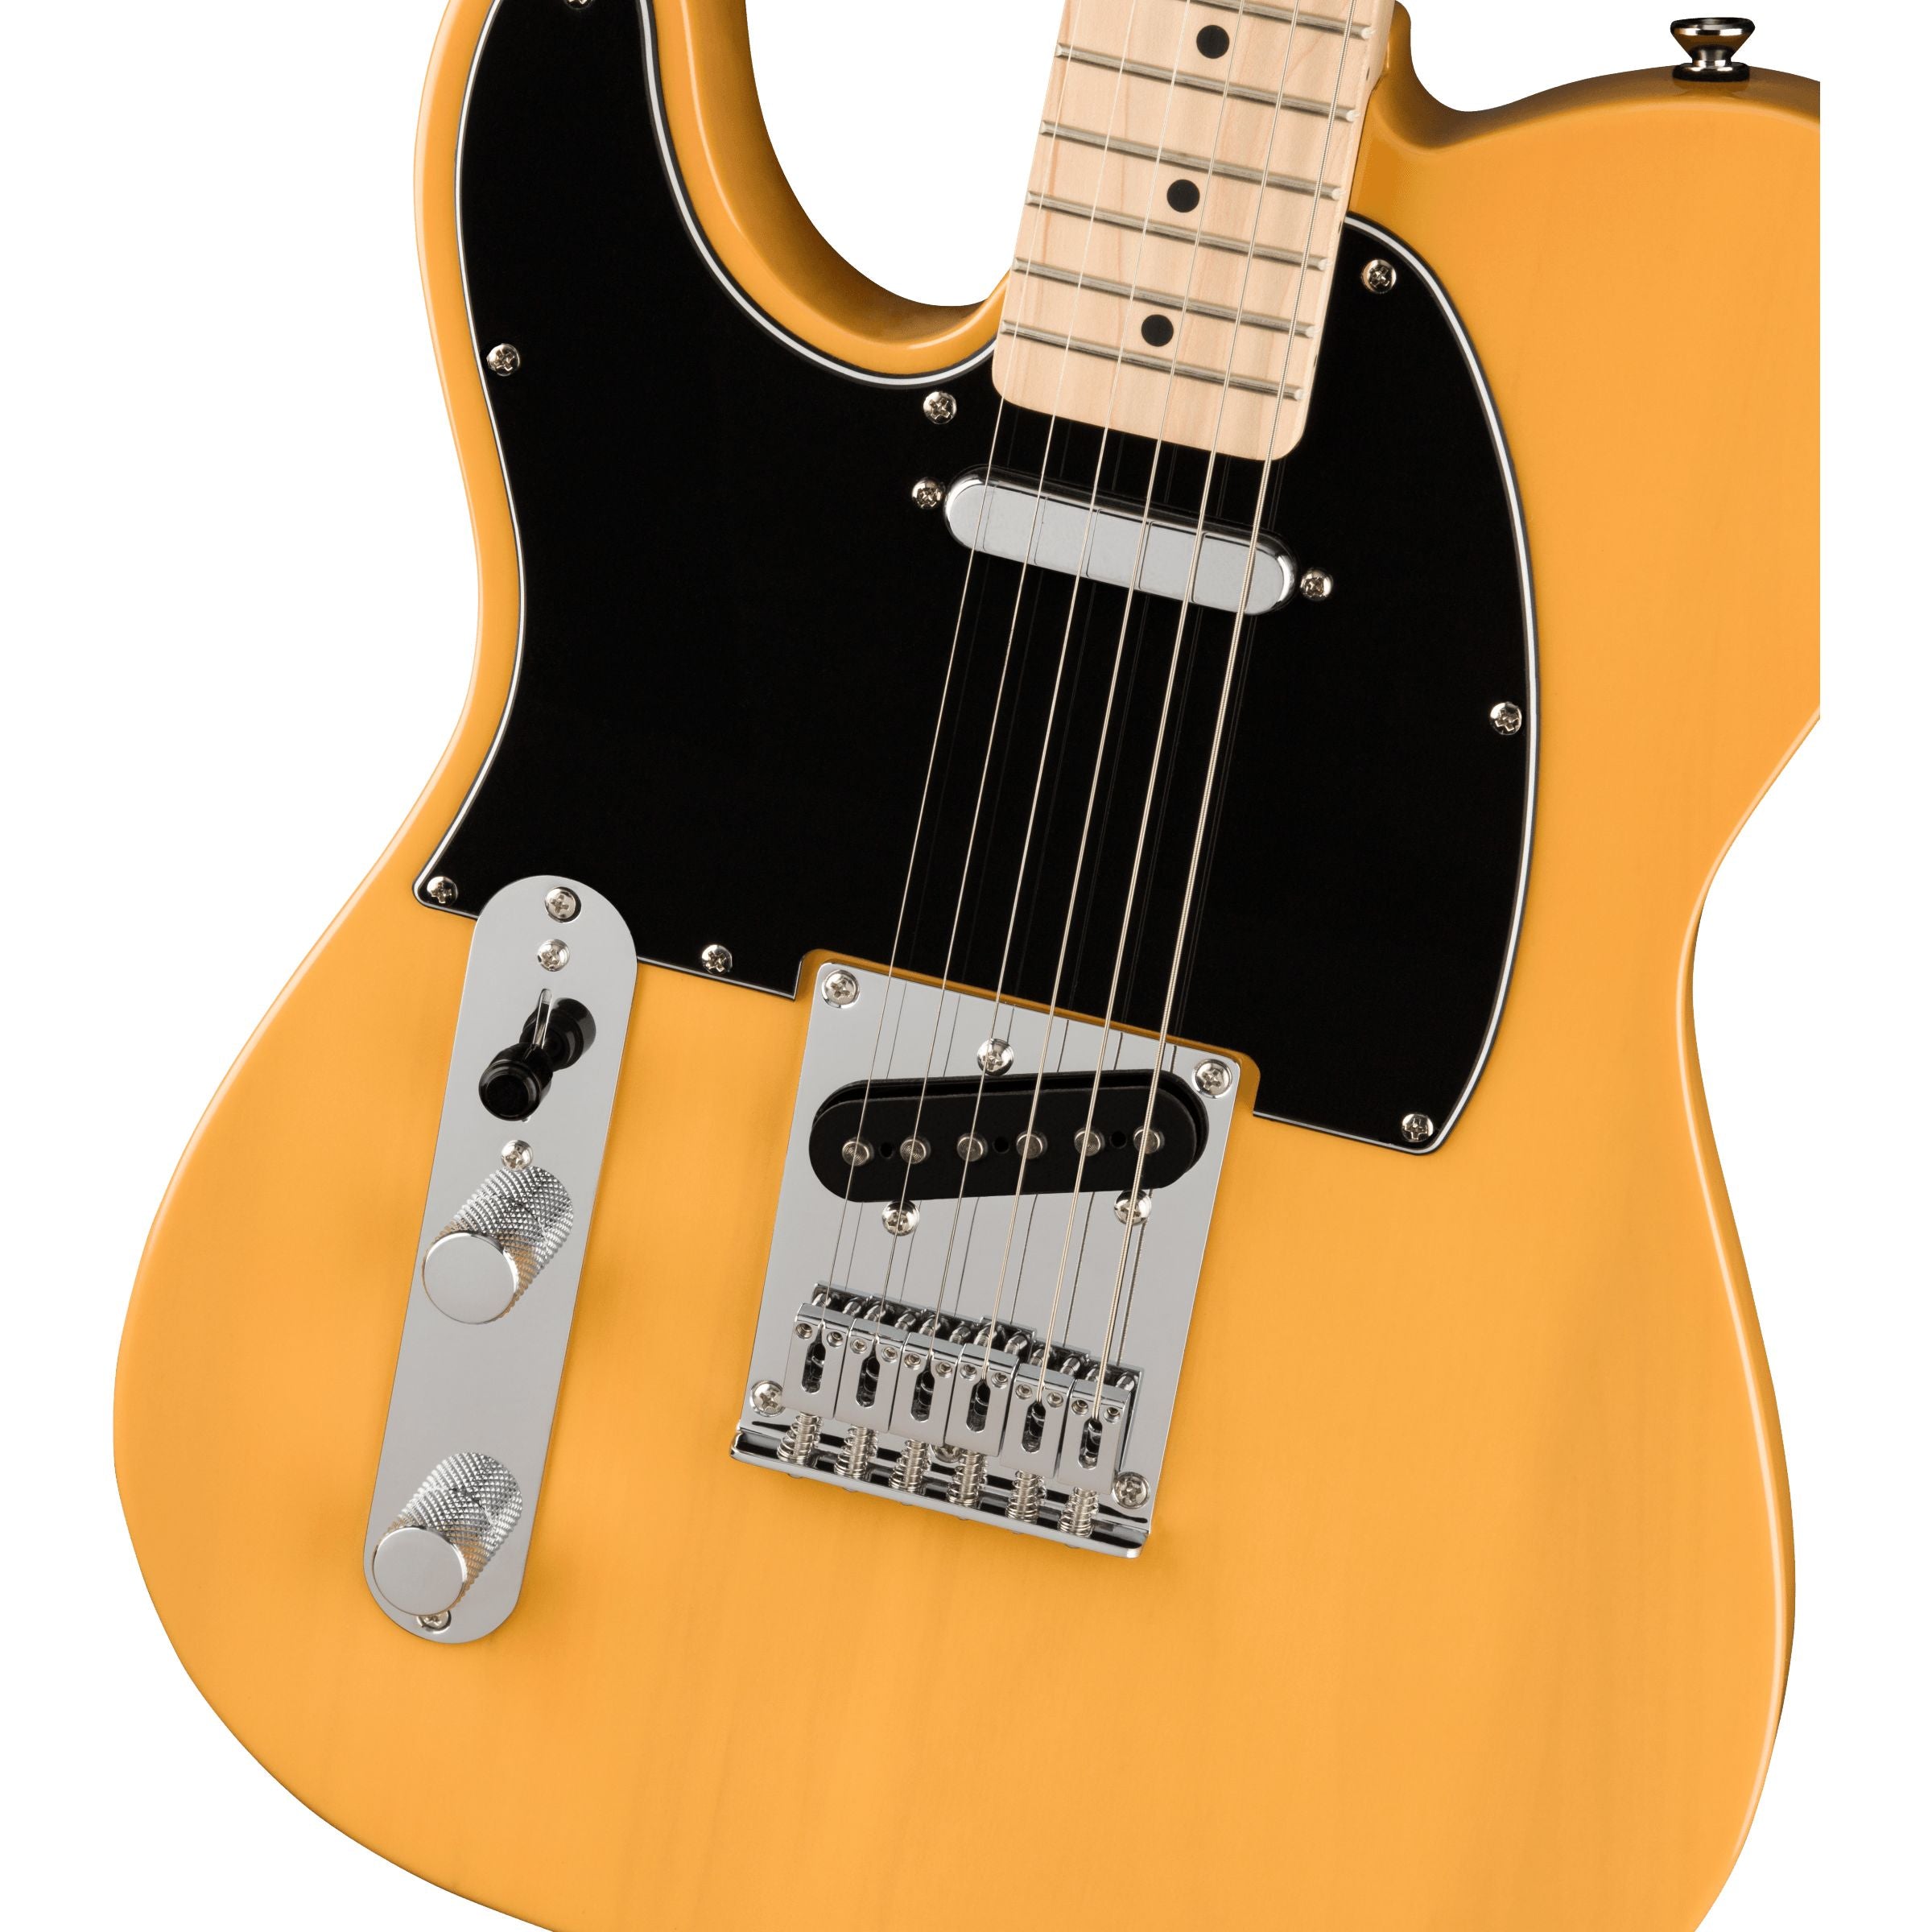 Squier Affinity Series Left-Handed Telecaster, Butterscotch Blonde